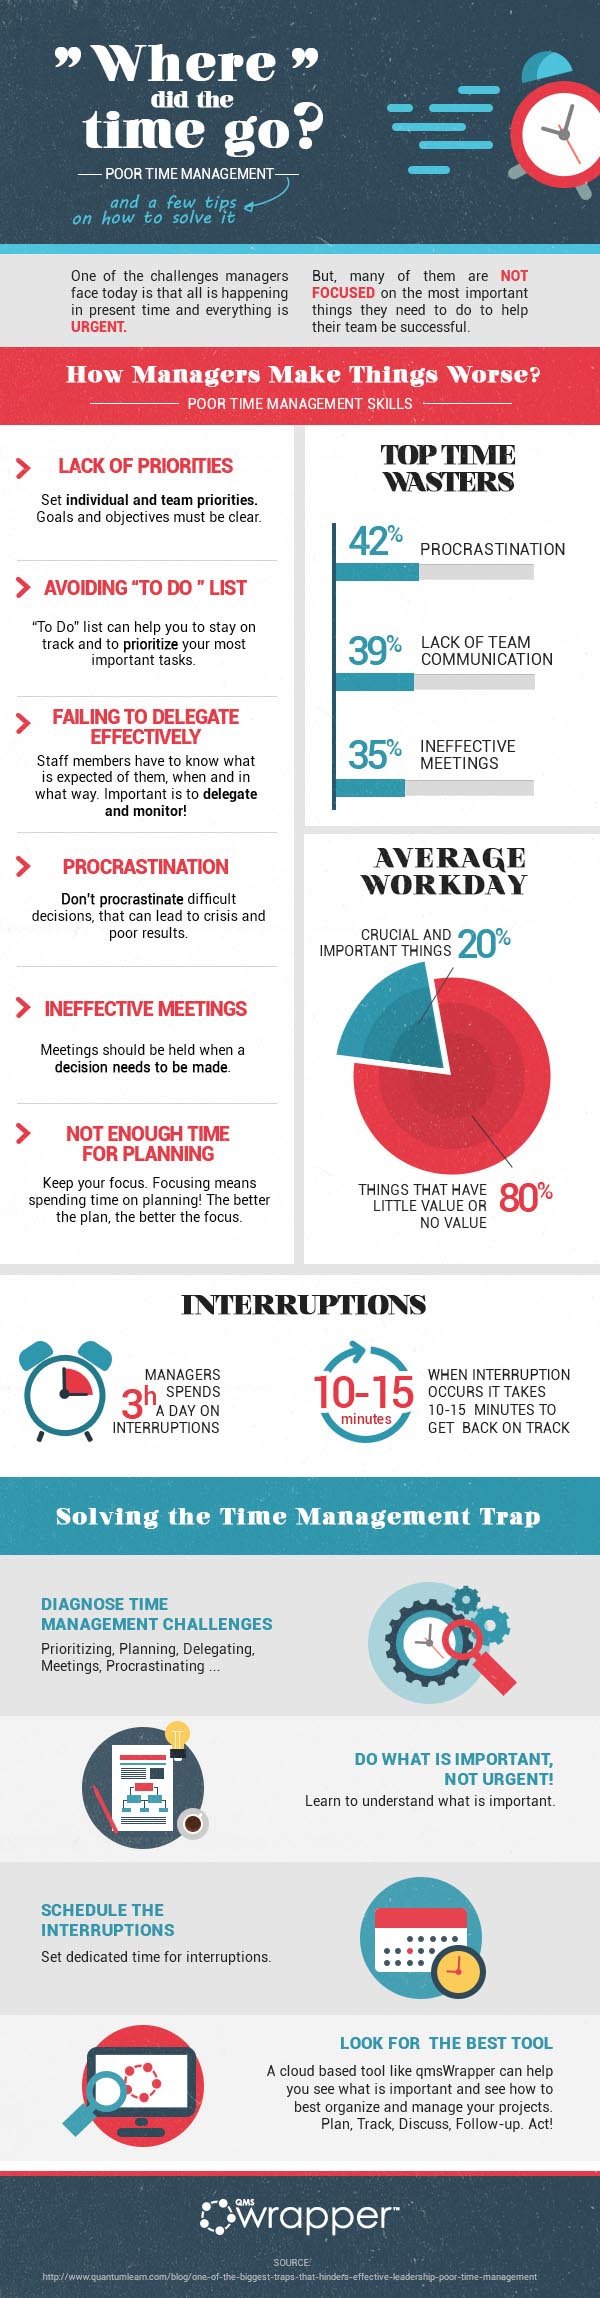 This infographic explains the most disturbing poor management skills, and also gives some tips